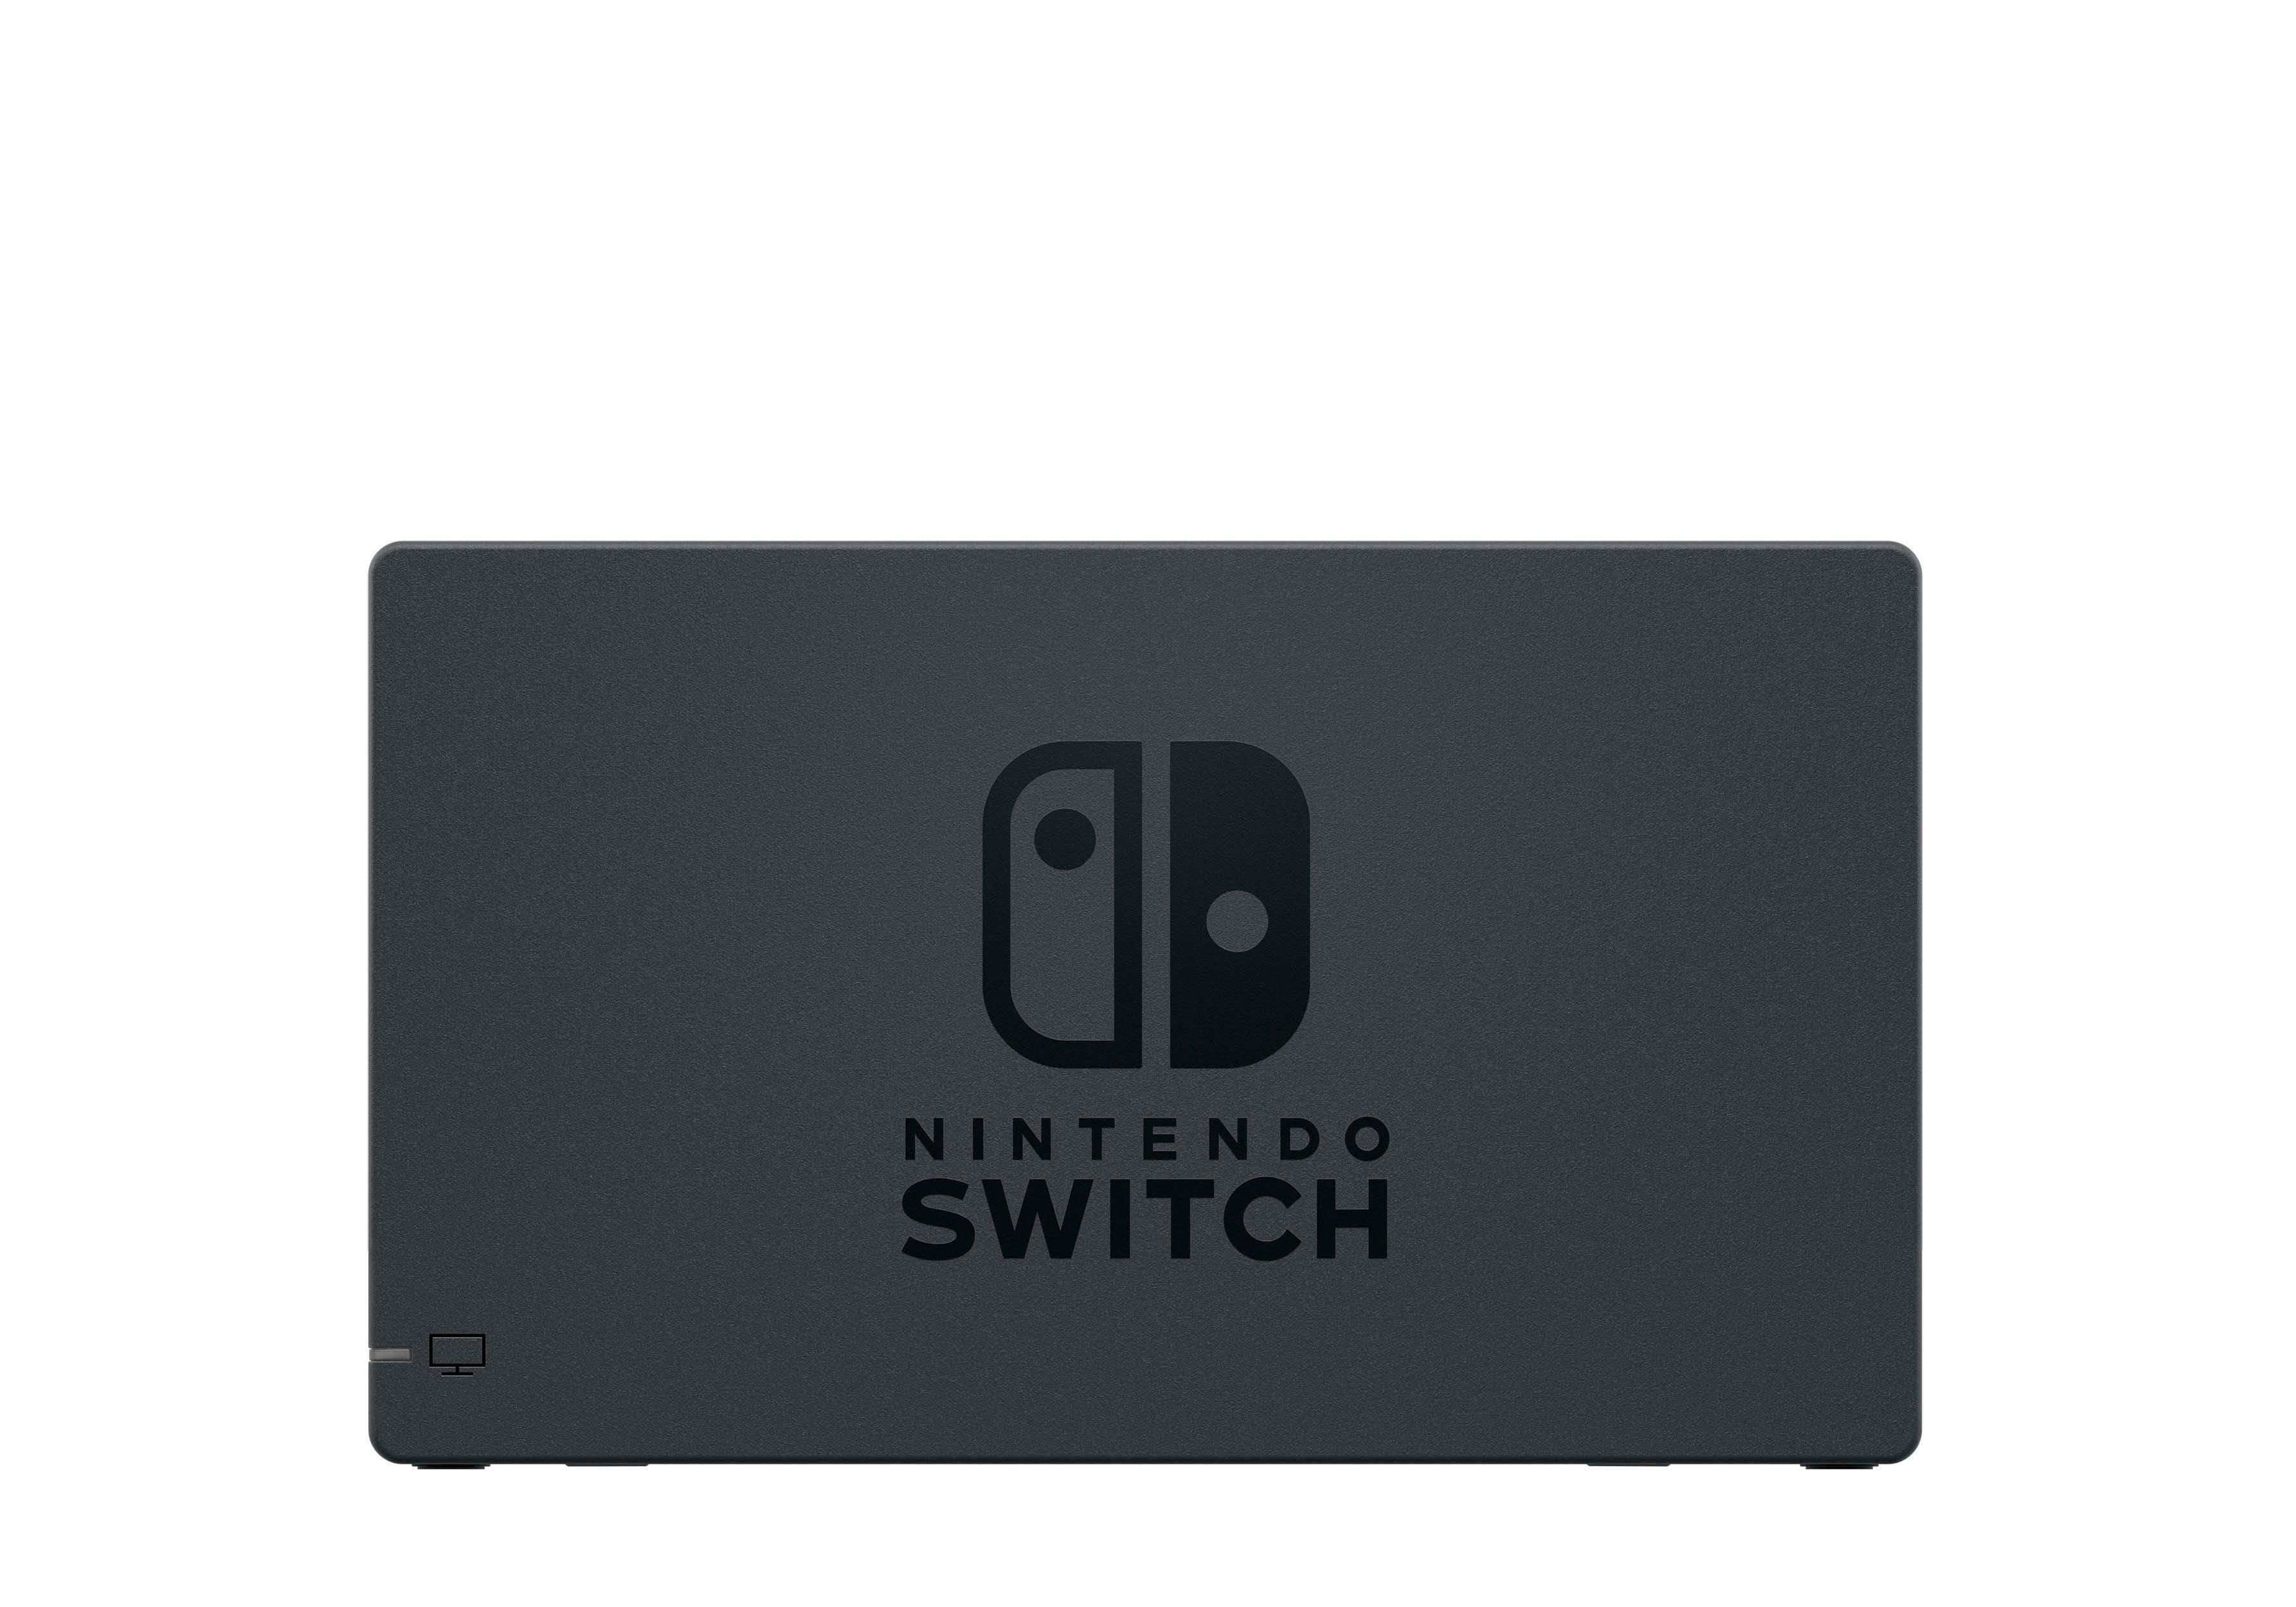 Nintendo Switch Dock Set (2 stores) see prices now »